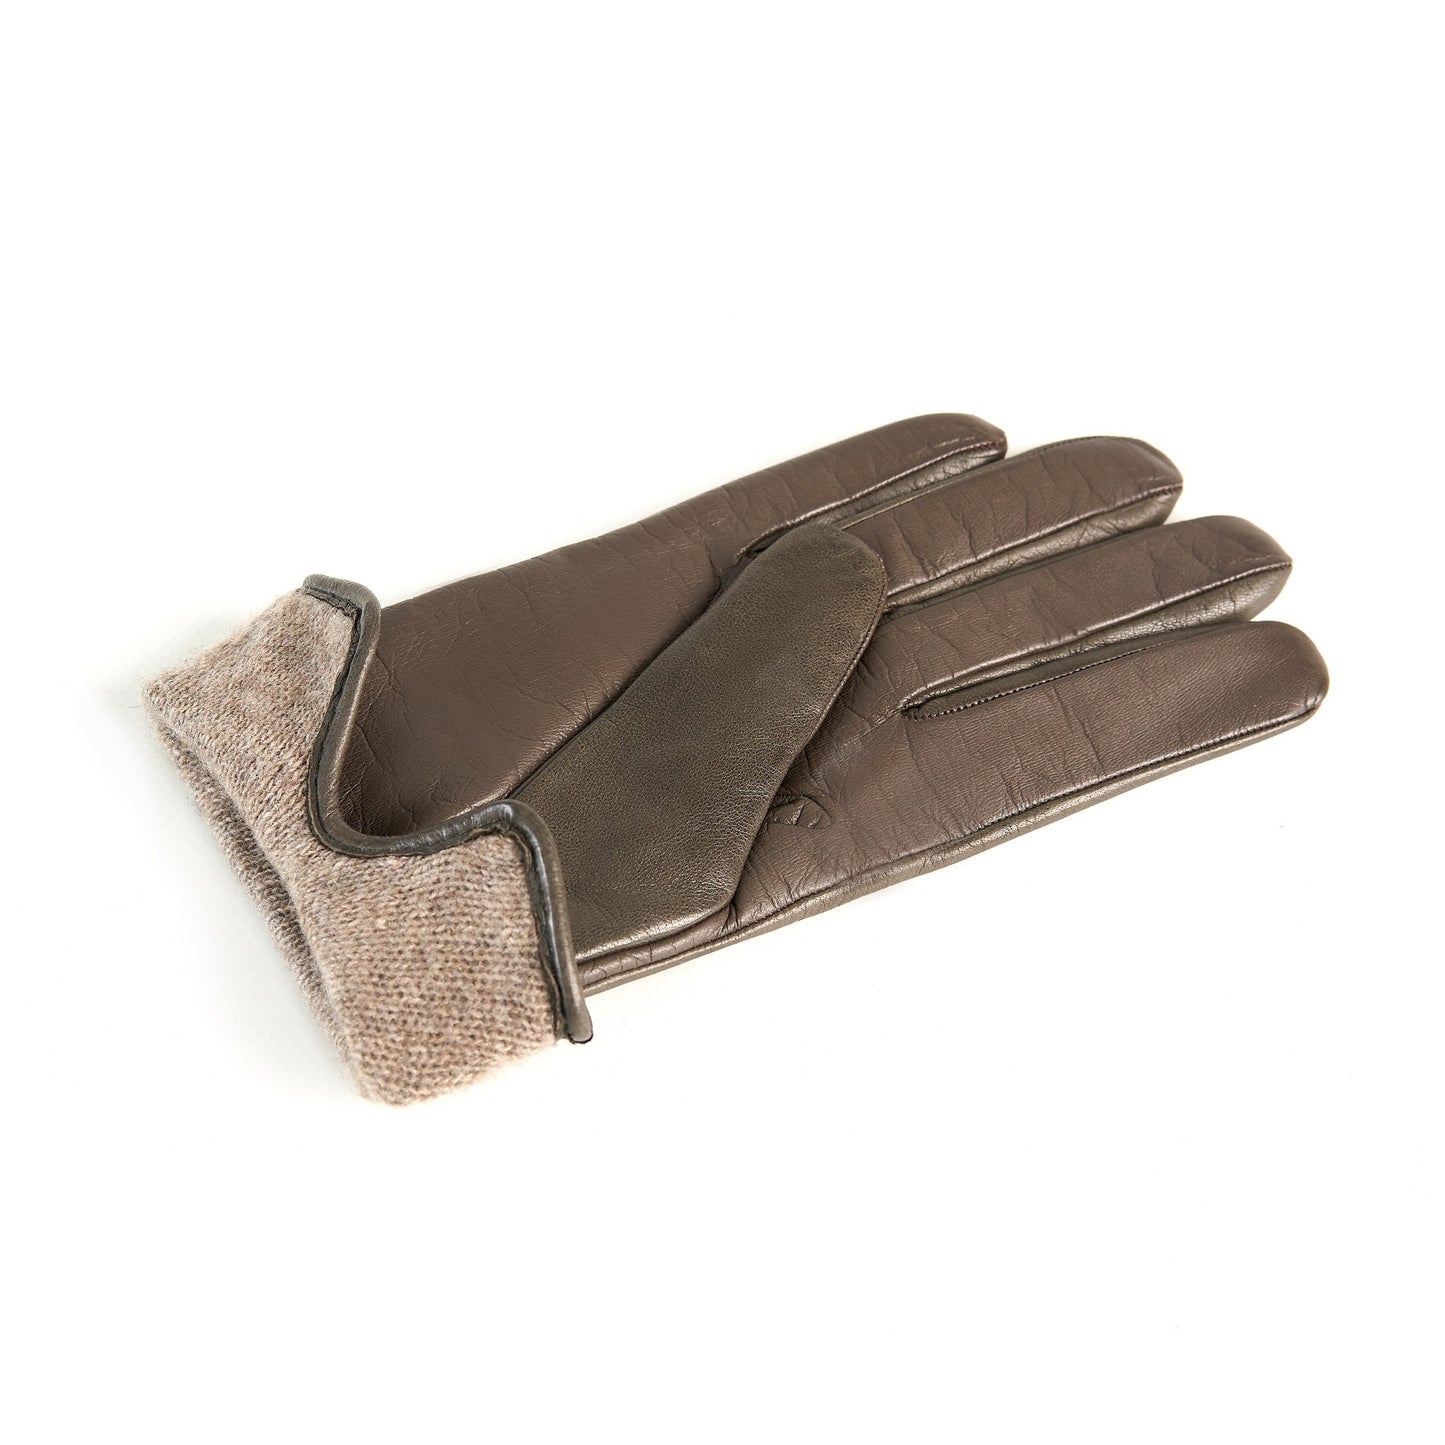 Women’s basic mud soft nappa leather gloves with palm opening and mix cashmere lining